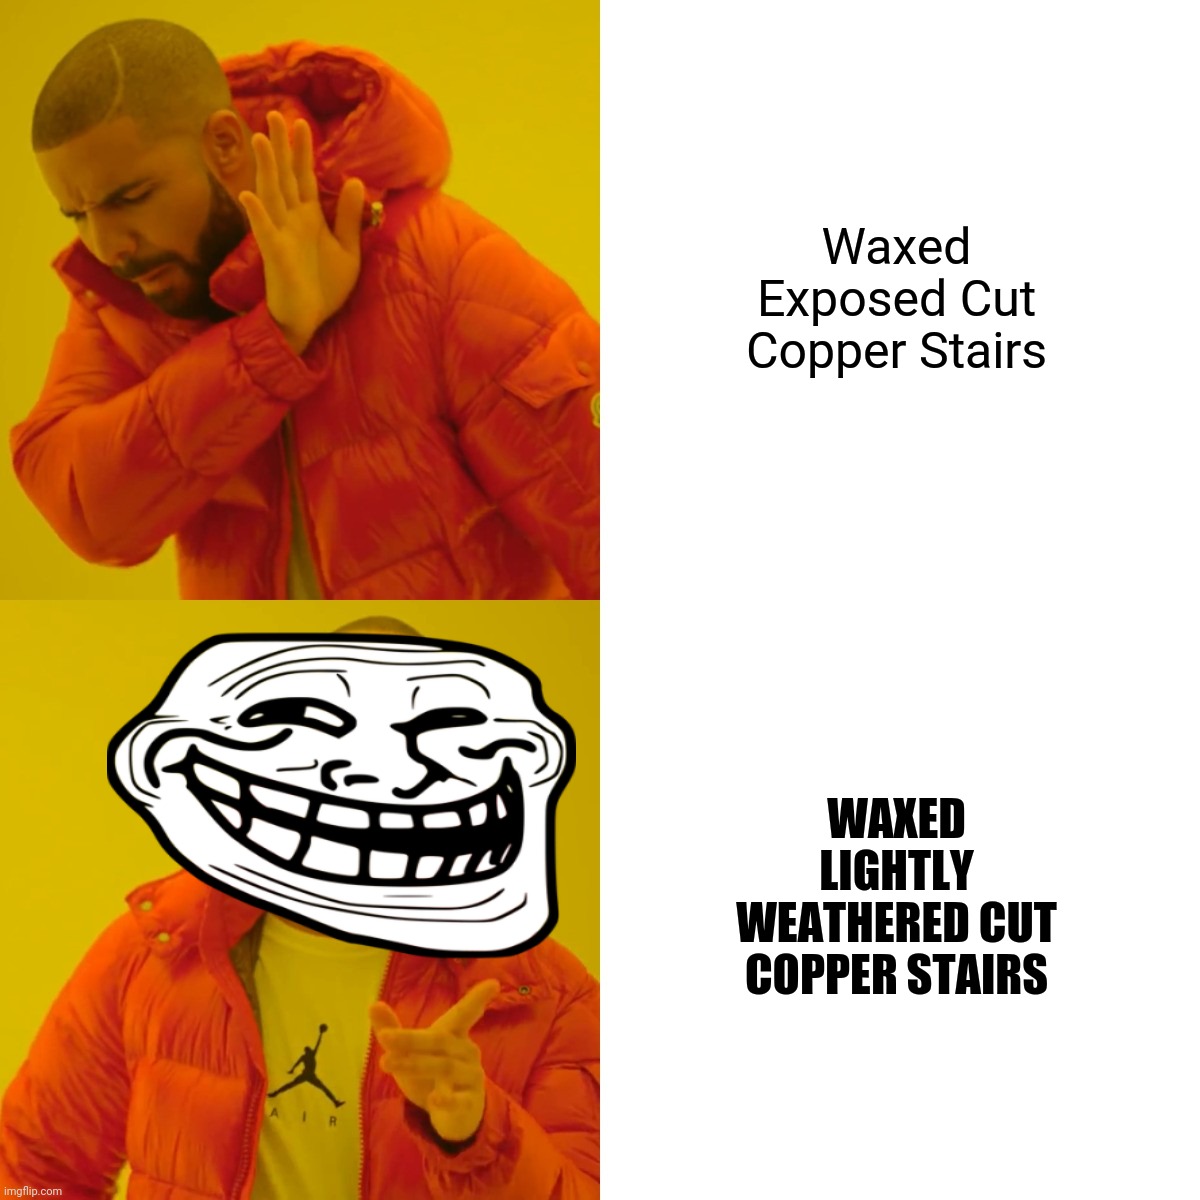 Lol | Waxed Exposed Cut Copper Stairs WAXED LIGHTLY WEATHERED CUT COPPER STAIRS | image tagged in memes,drake hotline bling,minecraft | made w/ Imgflip meme maker